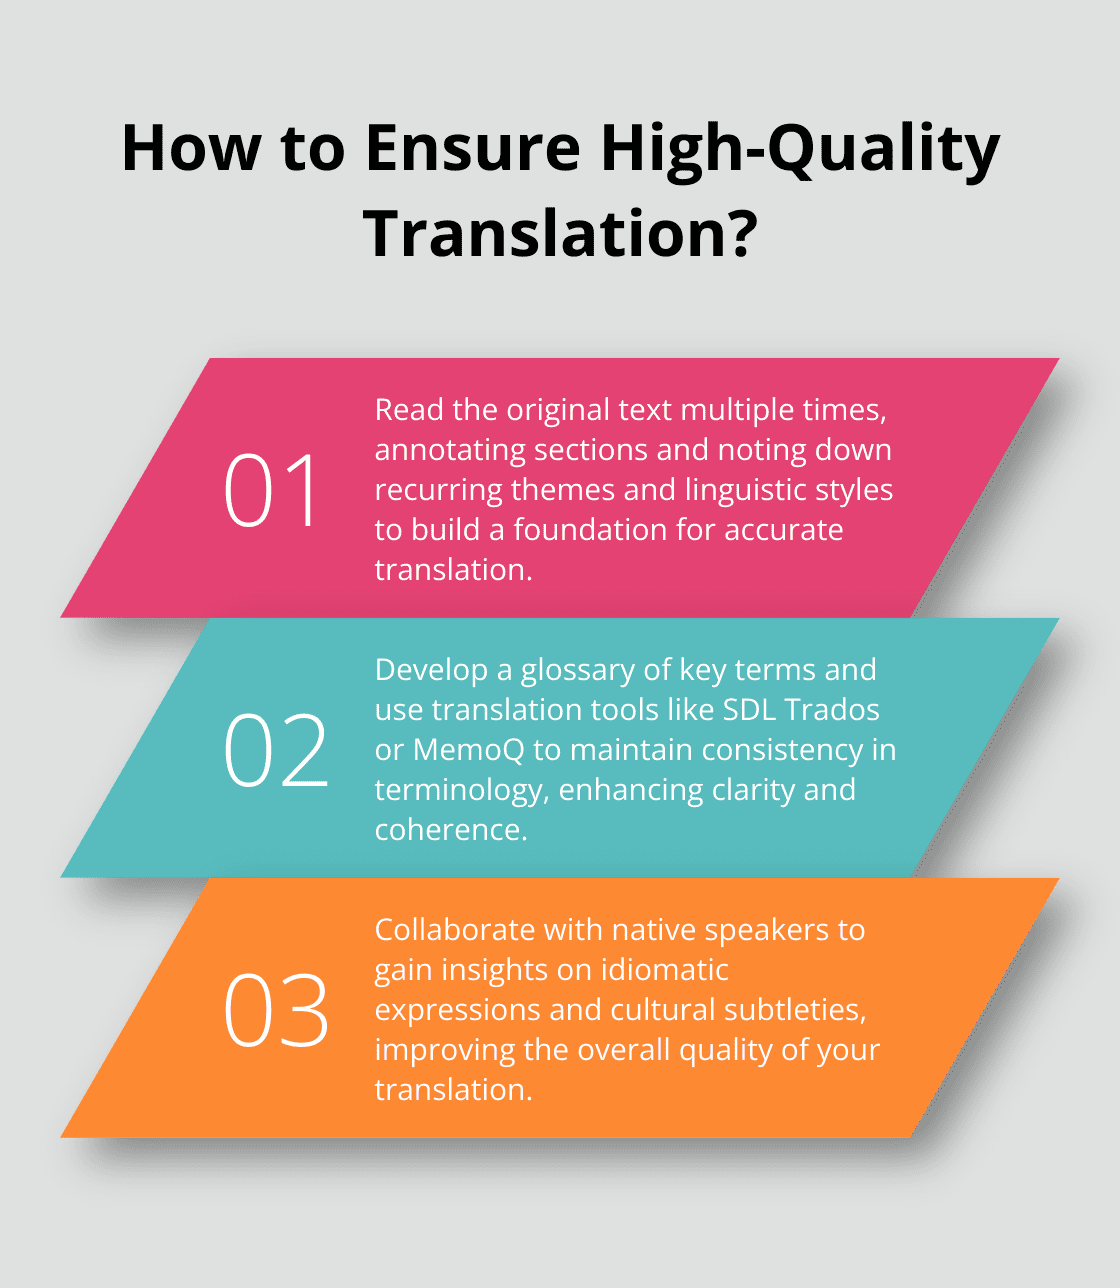 Fact - How to Ensure High-Quality Translation?